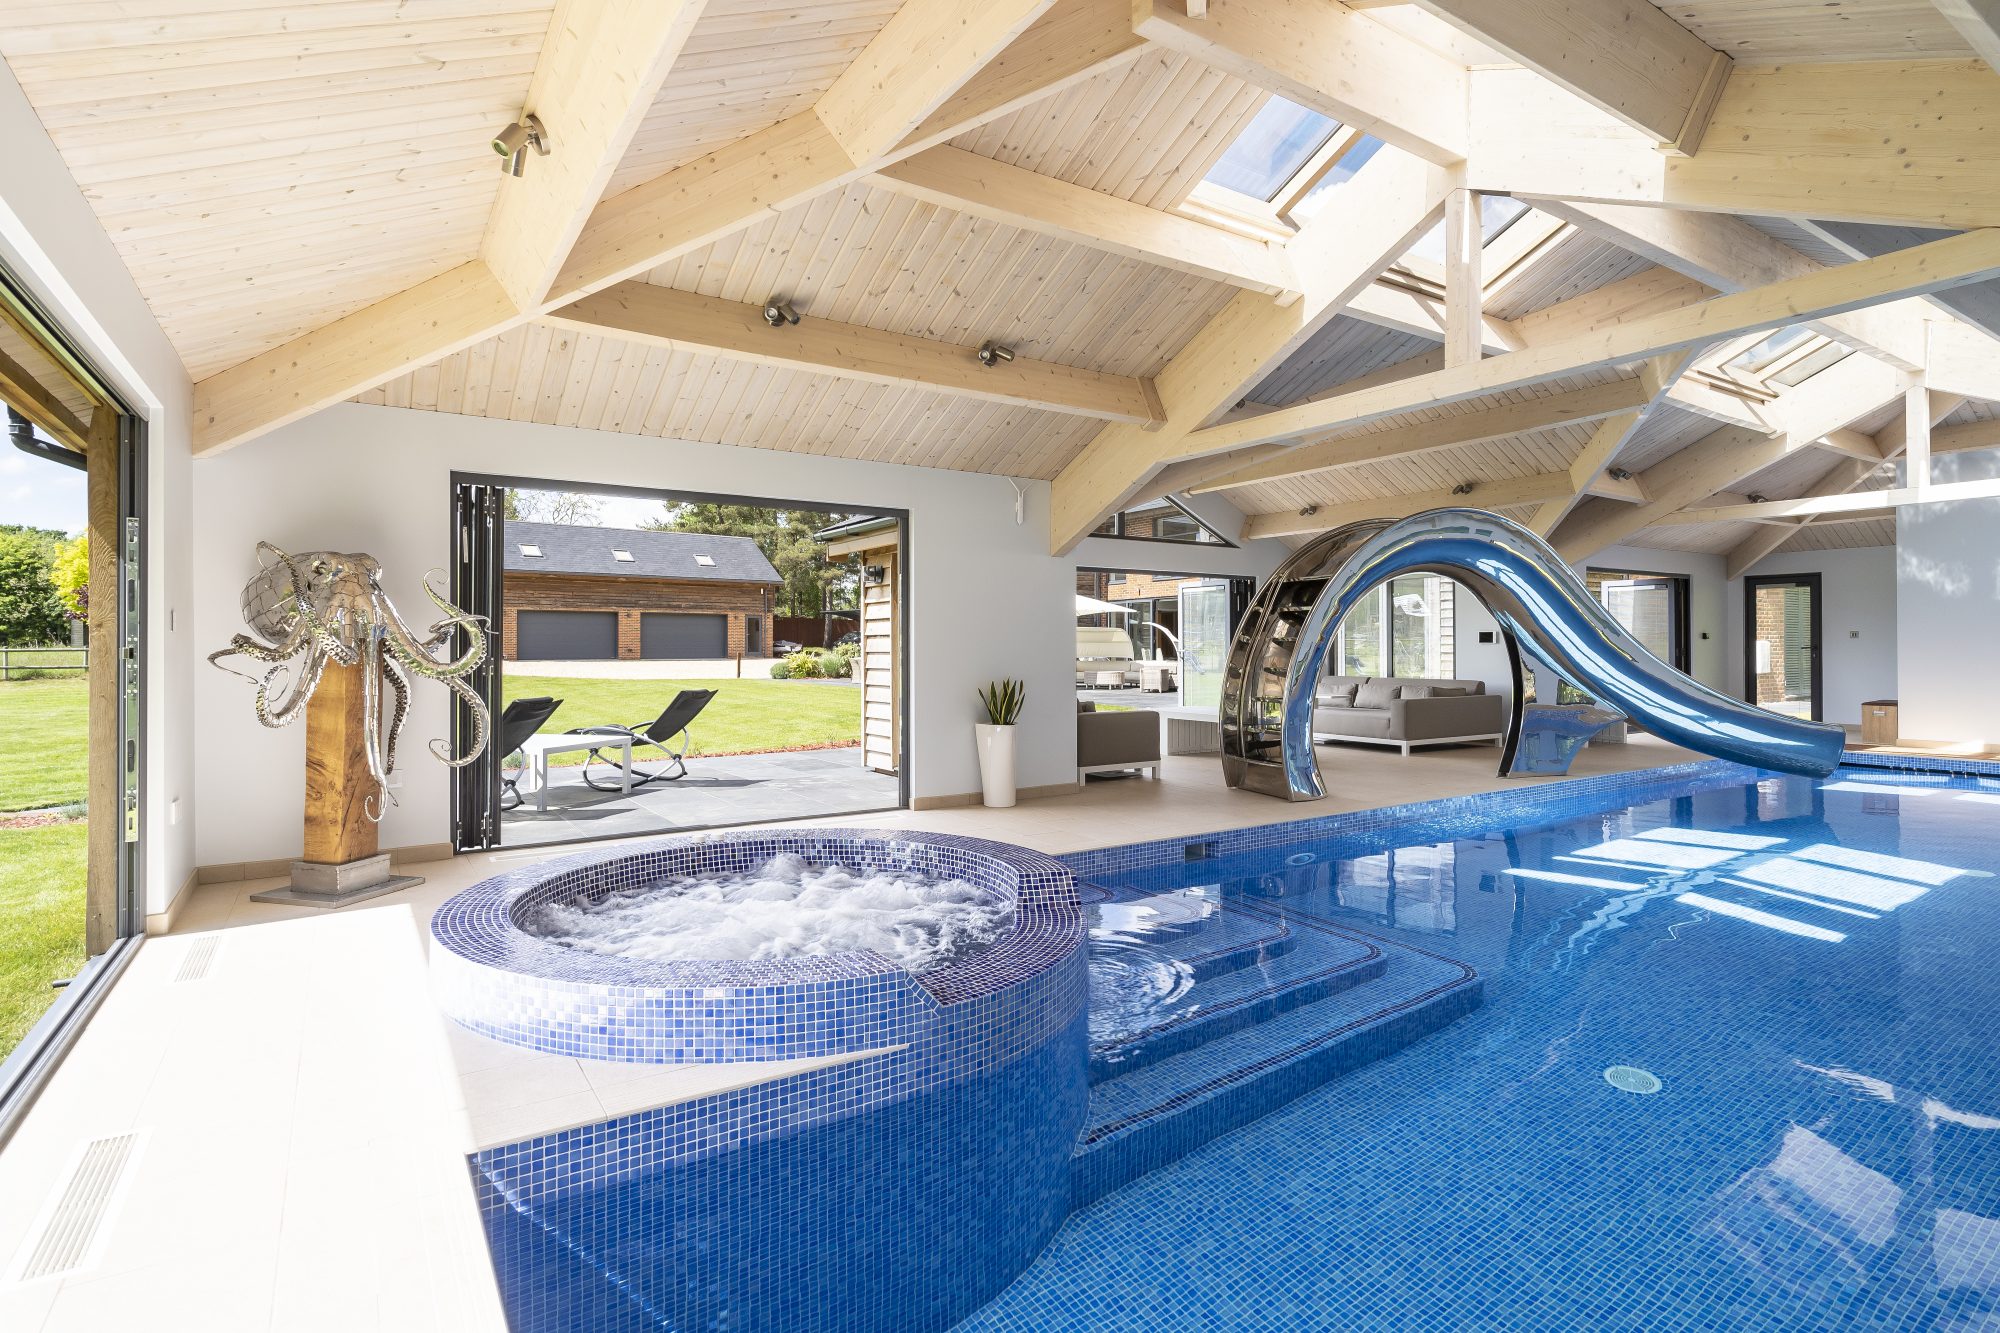 Indoor pool house with curved water slide, Jacuzzi, octopus sculpture and doors to the garden